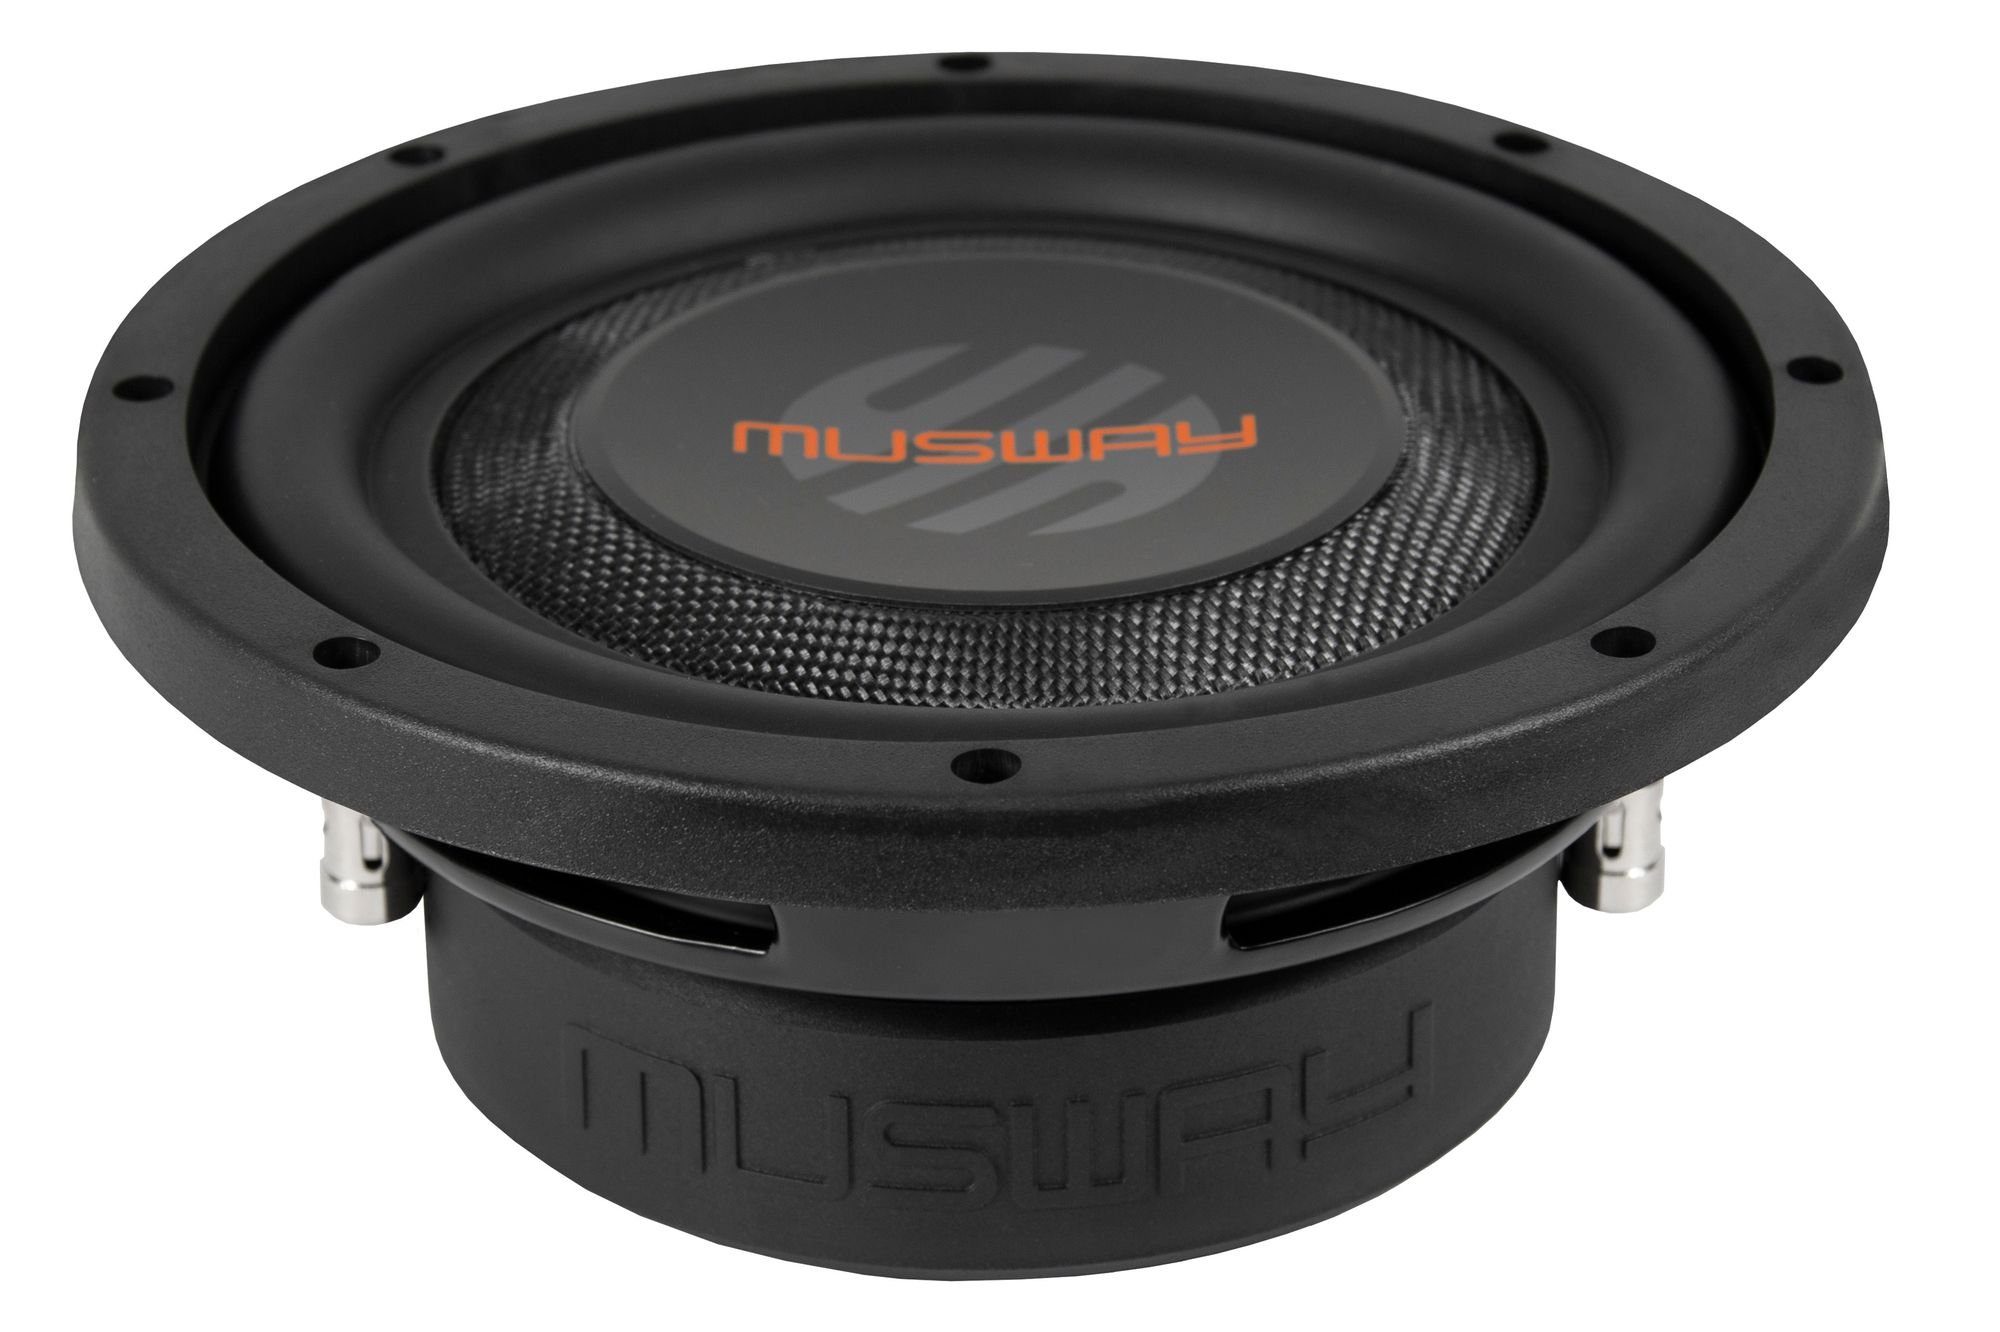 Musway MWS822 8? FLAT Subwoofer 8? (20 cm) FLACH Subwoofer Auto-Subwoofer (Musway MWS822, 8“ FLAT Subwoofer 8“ (20 cm) FLACH Subwoofer)